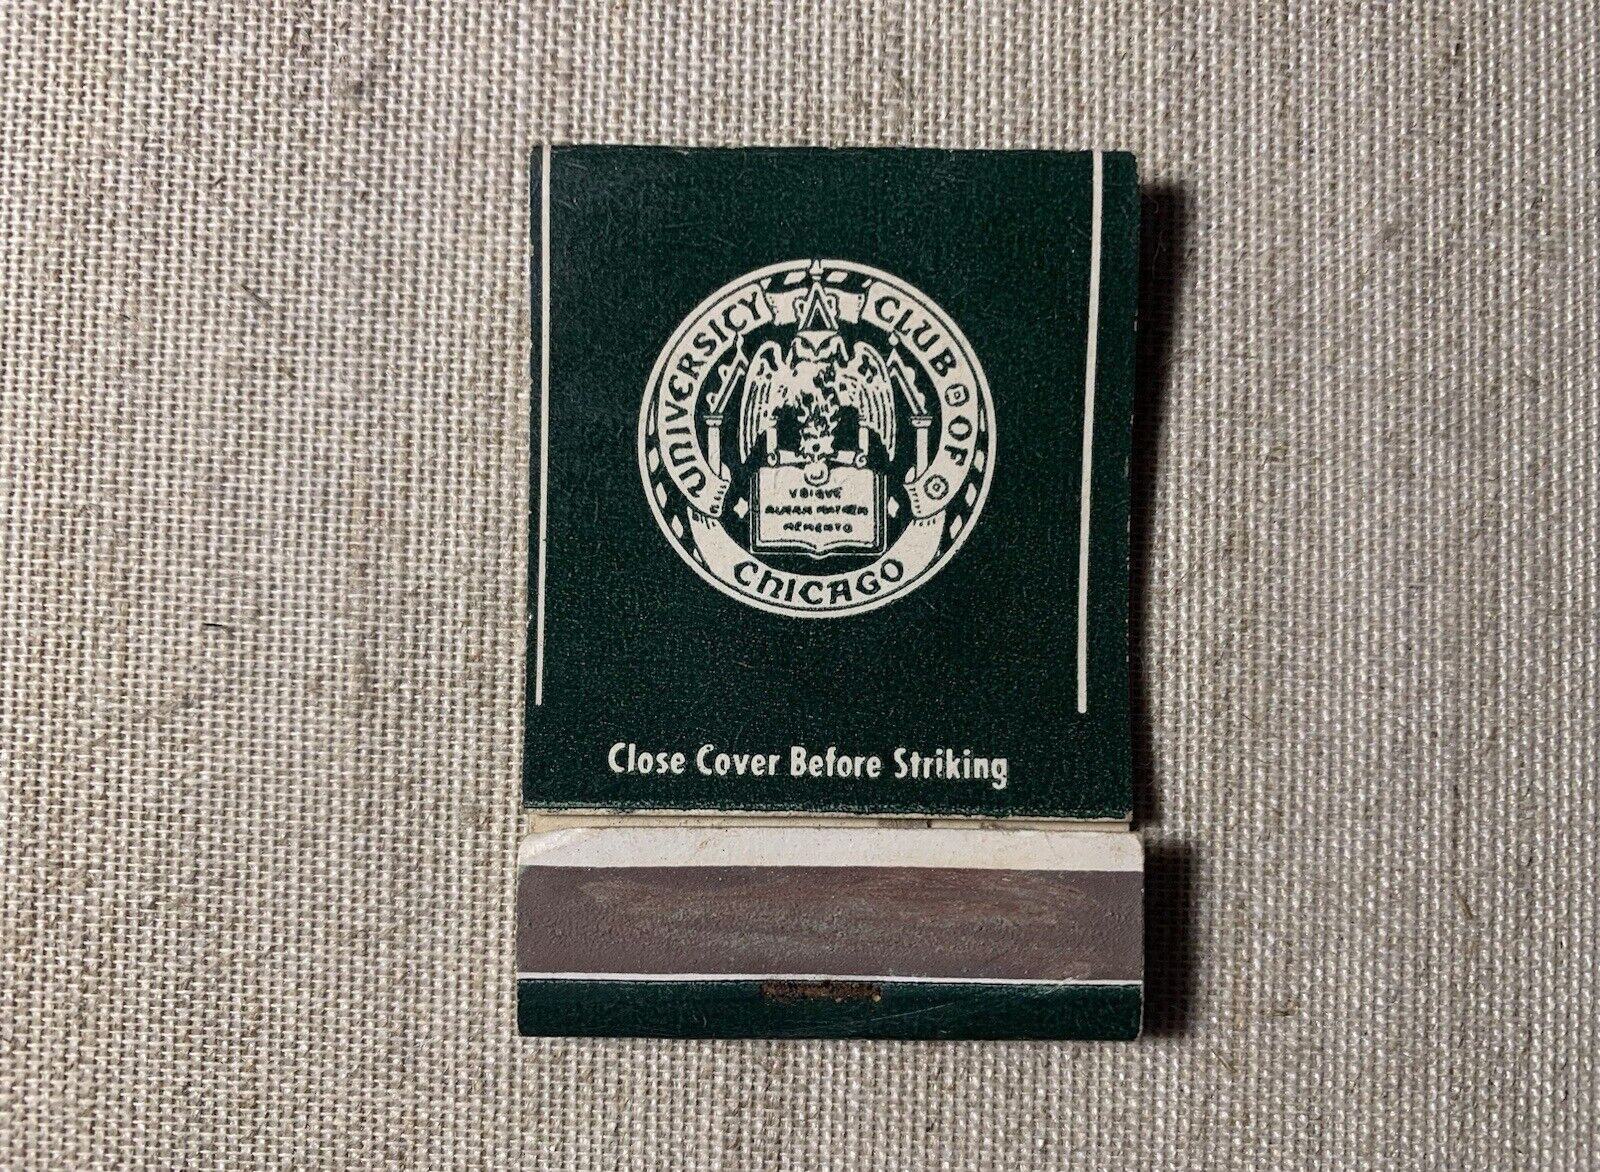 University Club of Chicago Chartered 1887 Vintage Matchbook Cover ~